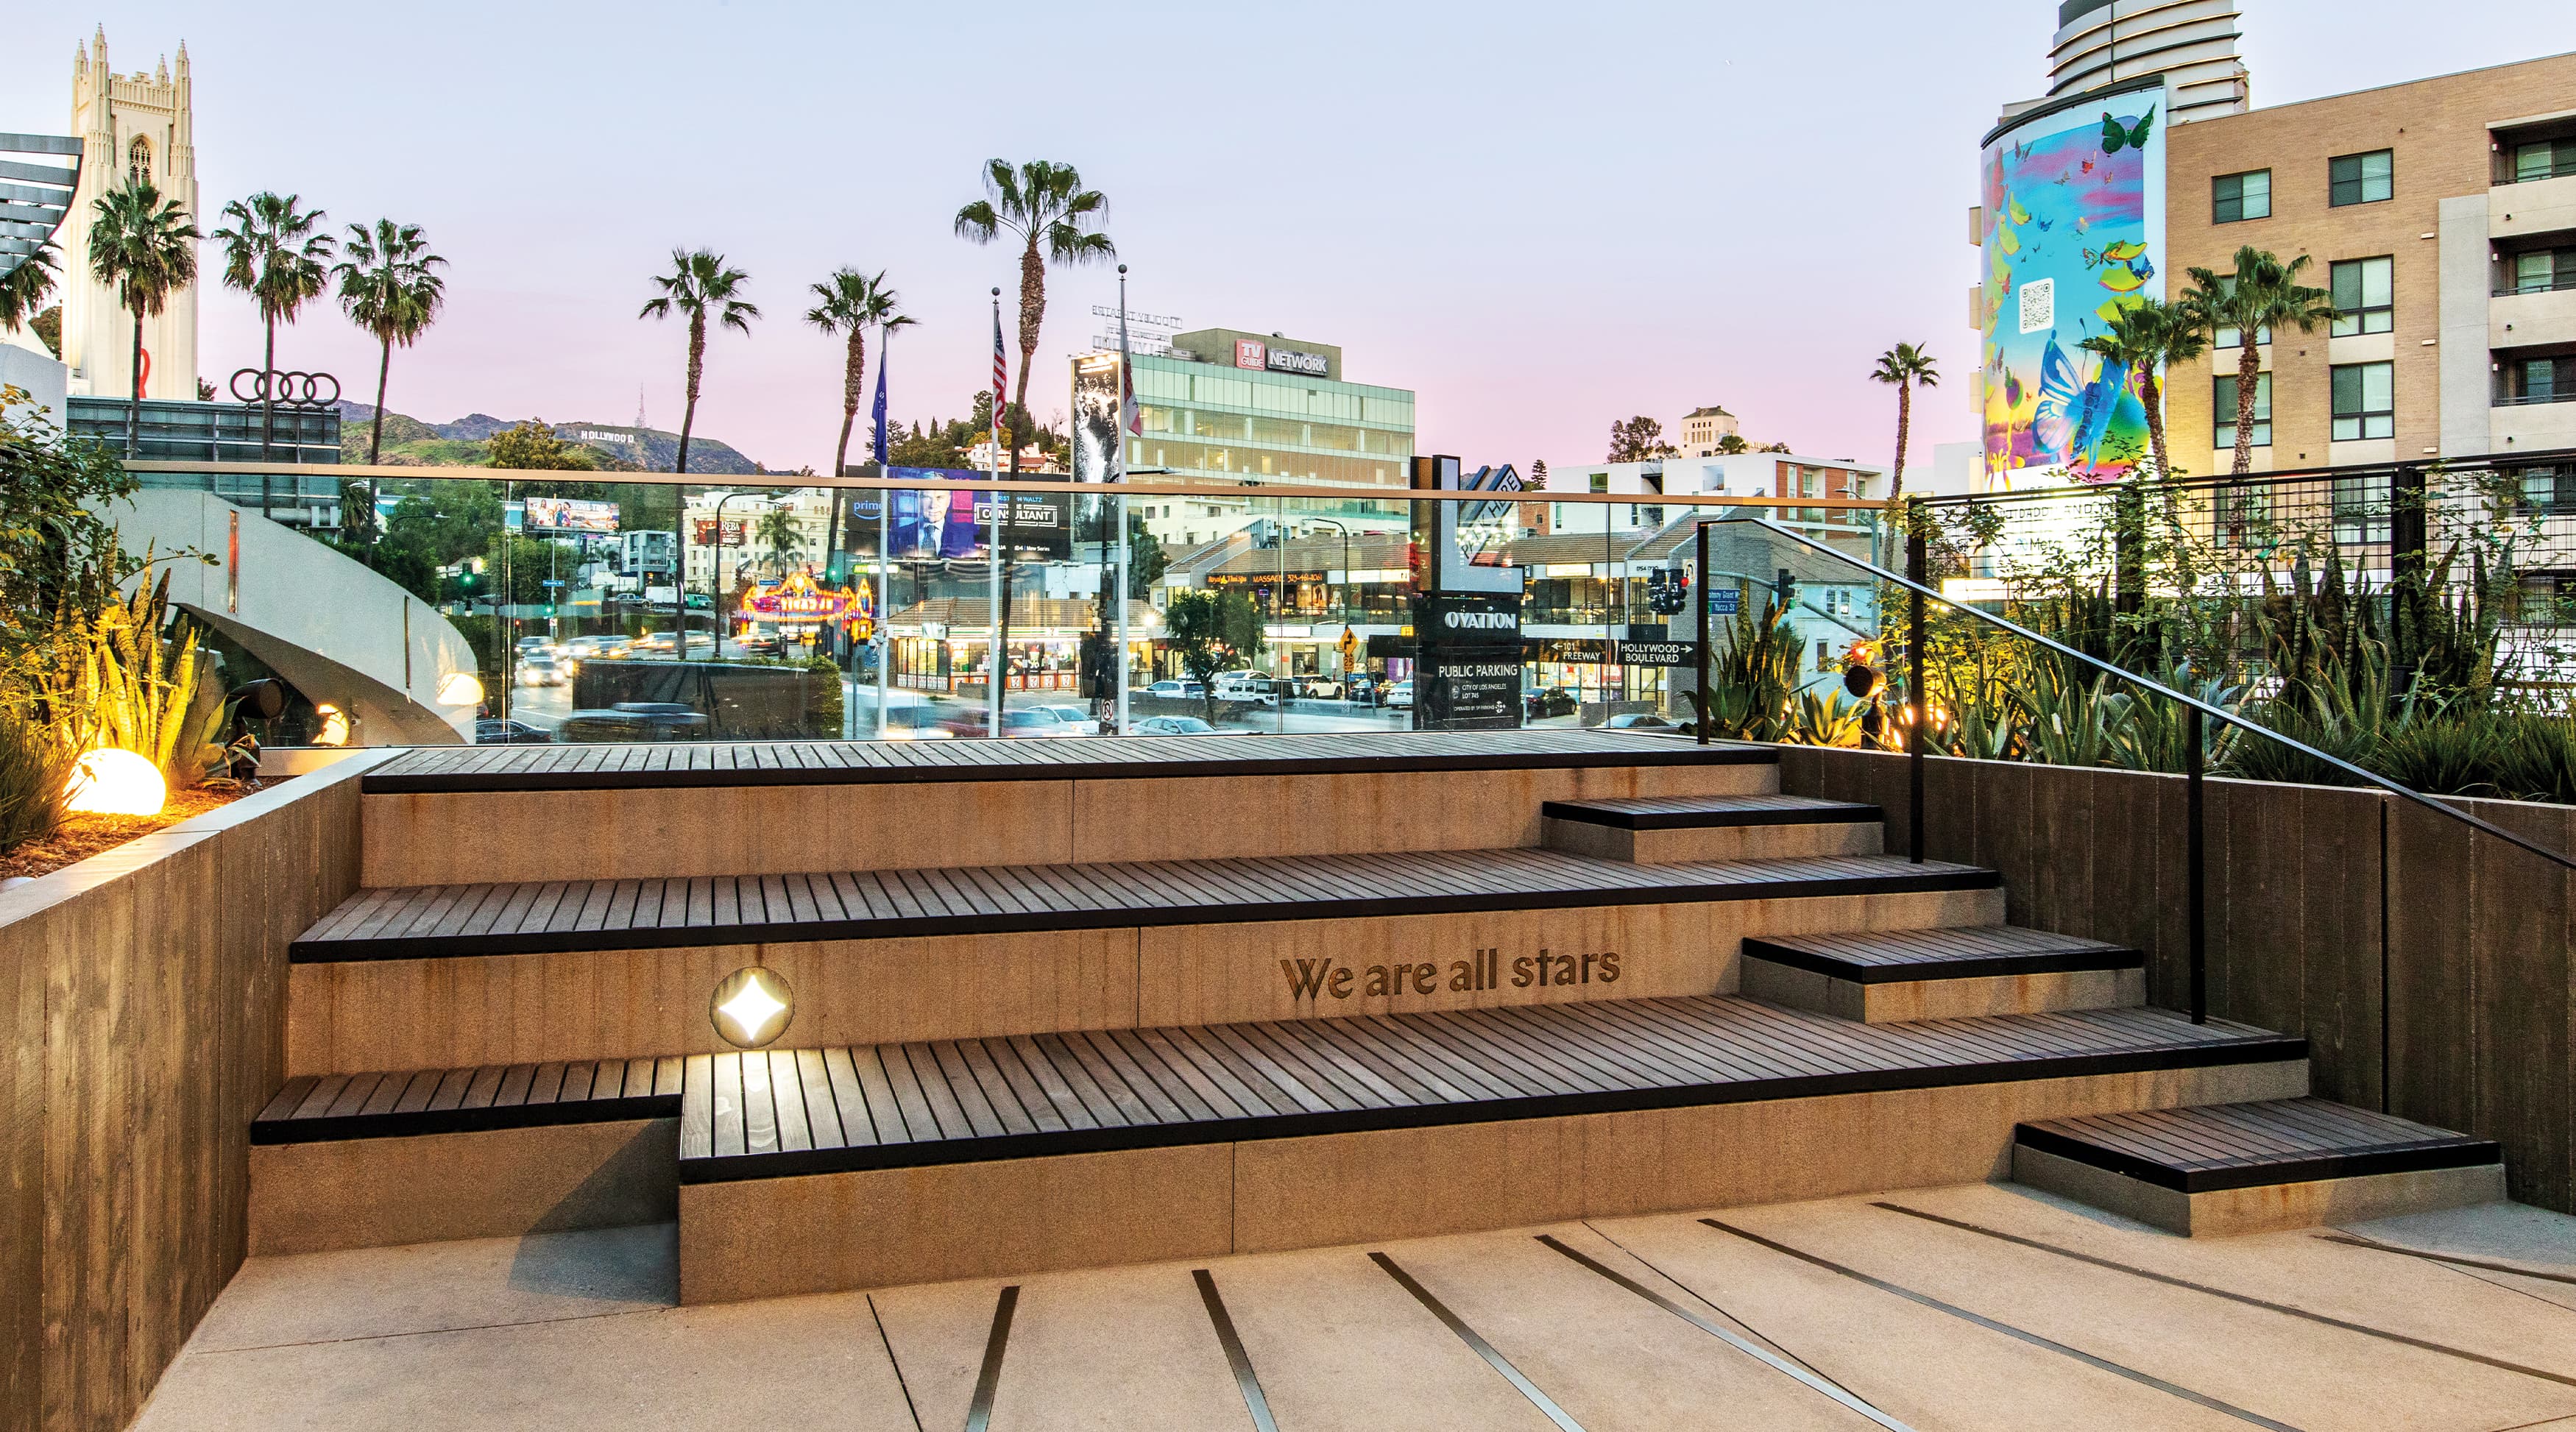 "We are all stars" bronze letters inlayed on viewing deck steps with Hollywood sign in the background done by RSM Design for Ovation Hollywood in Los Angeles, California.